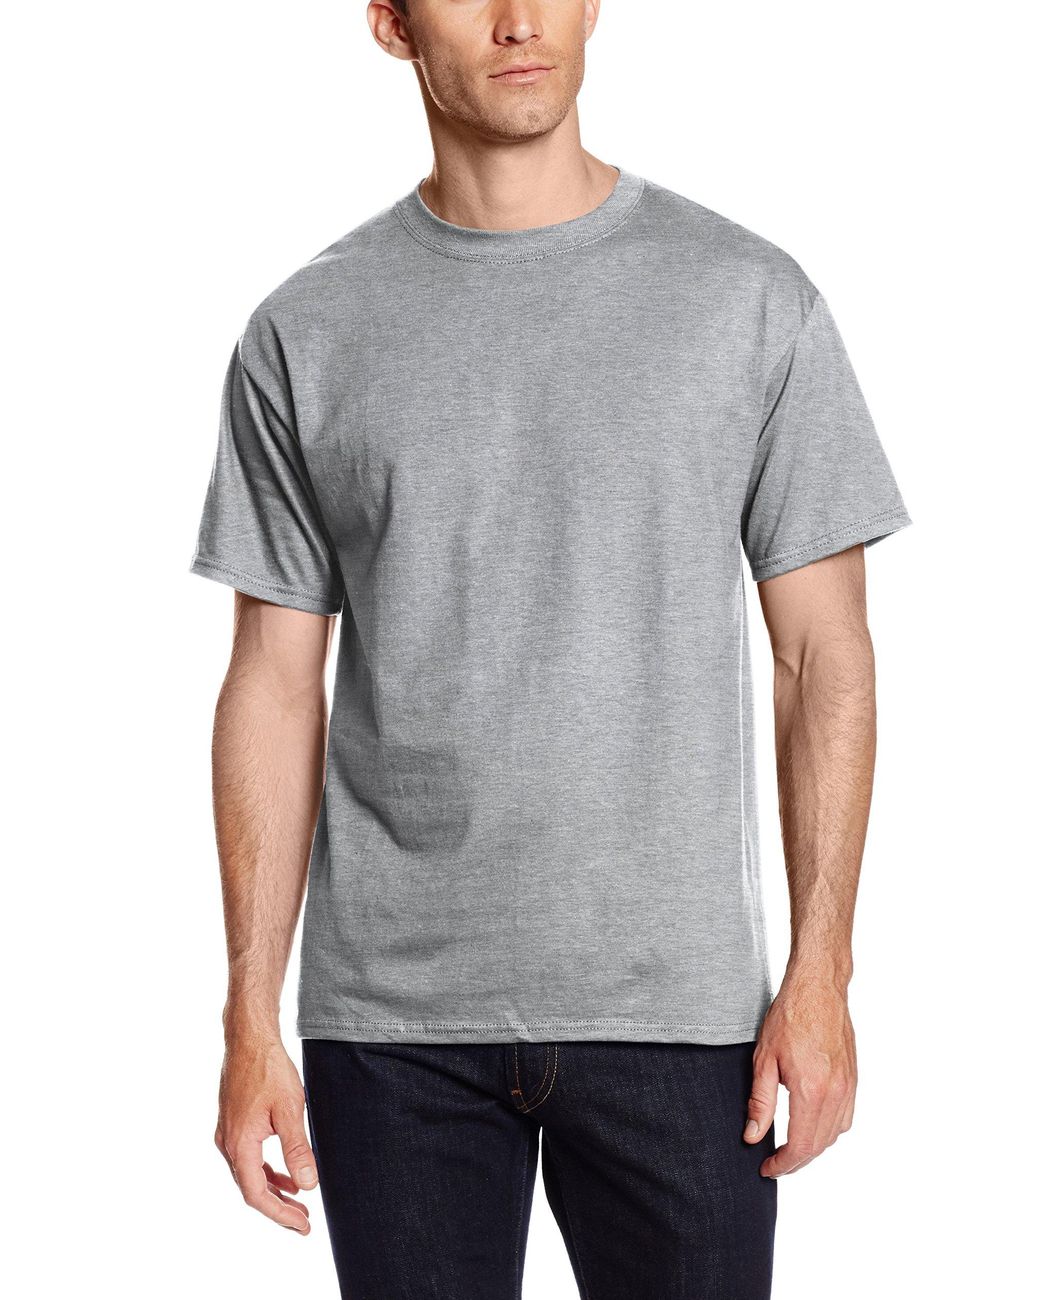 Hanes 6.1 Oz. Beefy-t (5180) in Light Steel (Gray) for Men - Save 70% ...